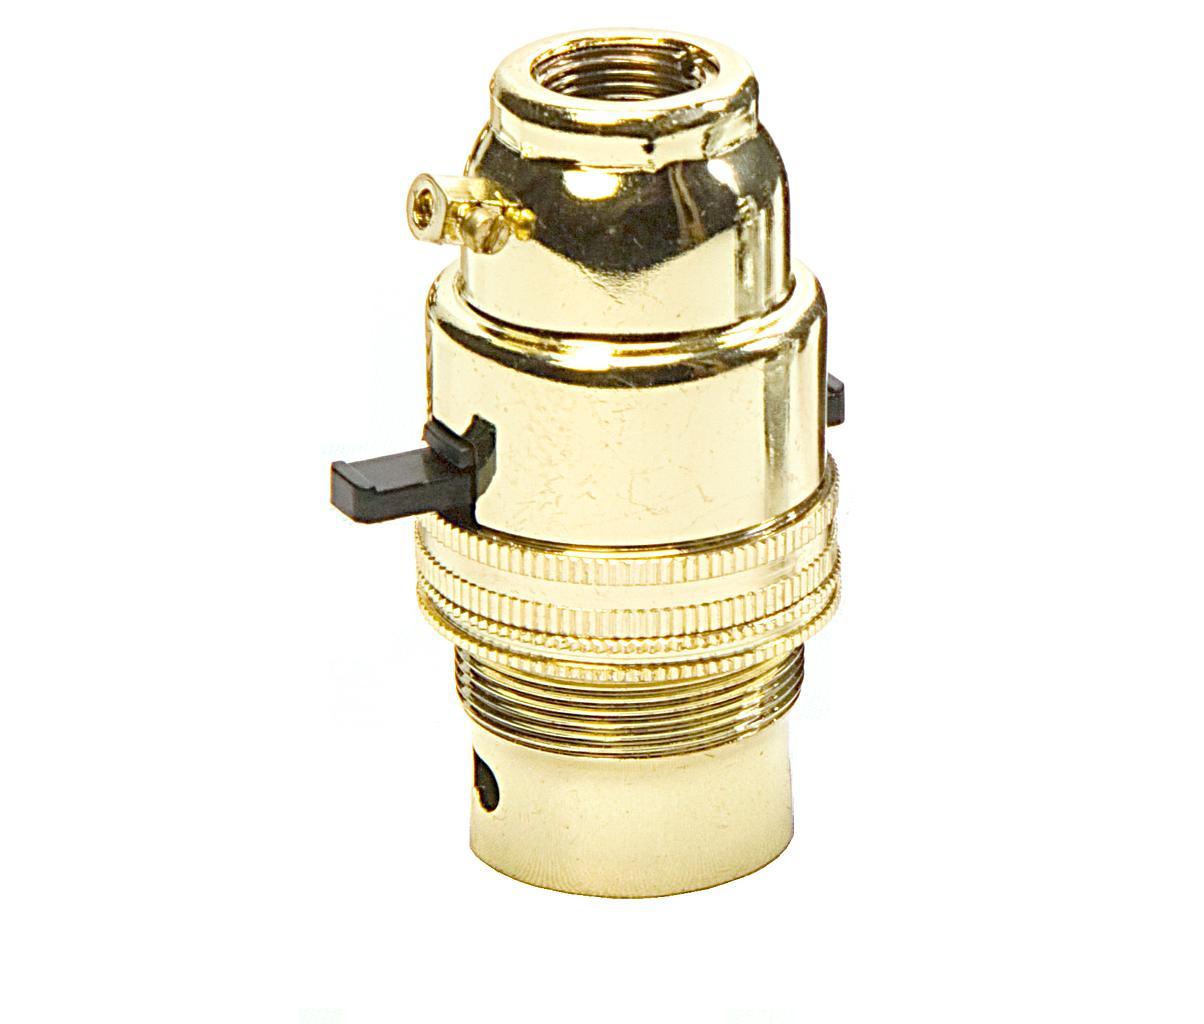 05144 Ecofix BC Lampholder ½" Switched Brass External Earth - LampFix - sparks-warehouse